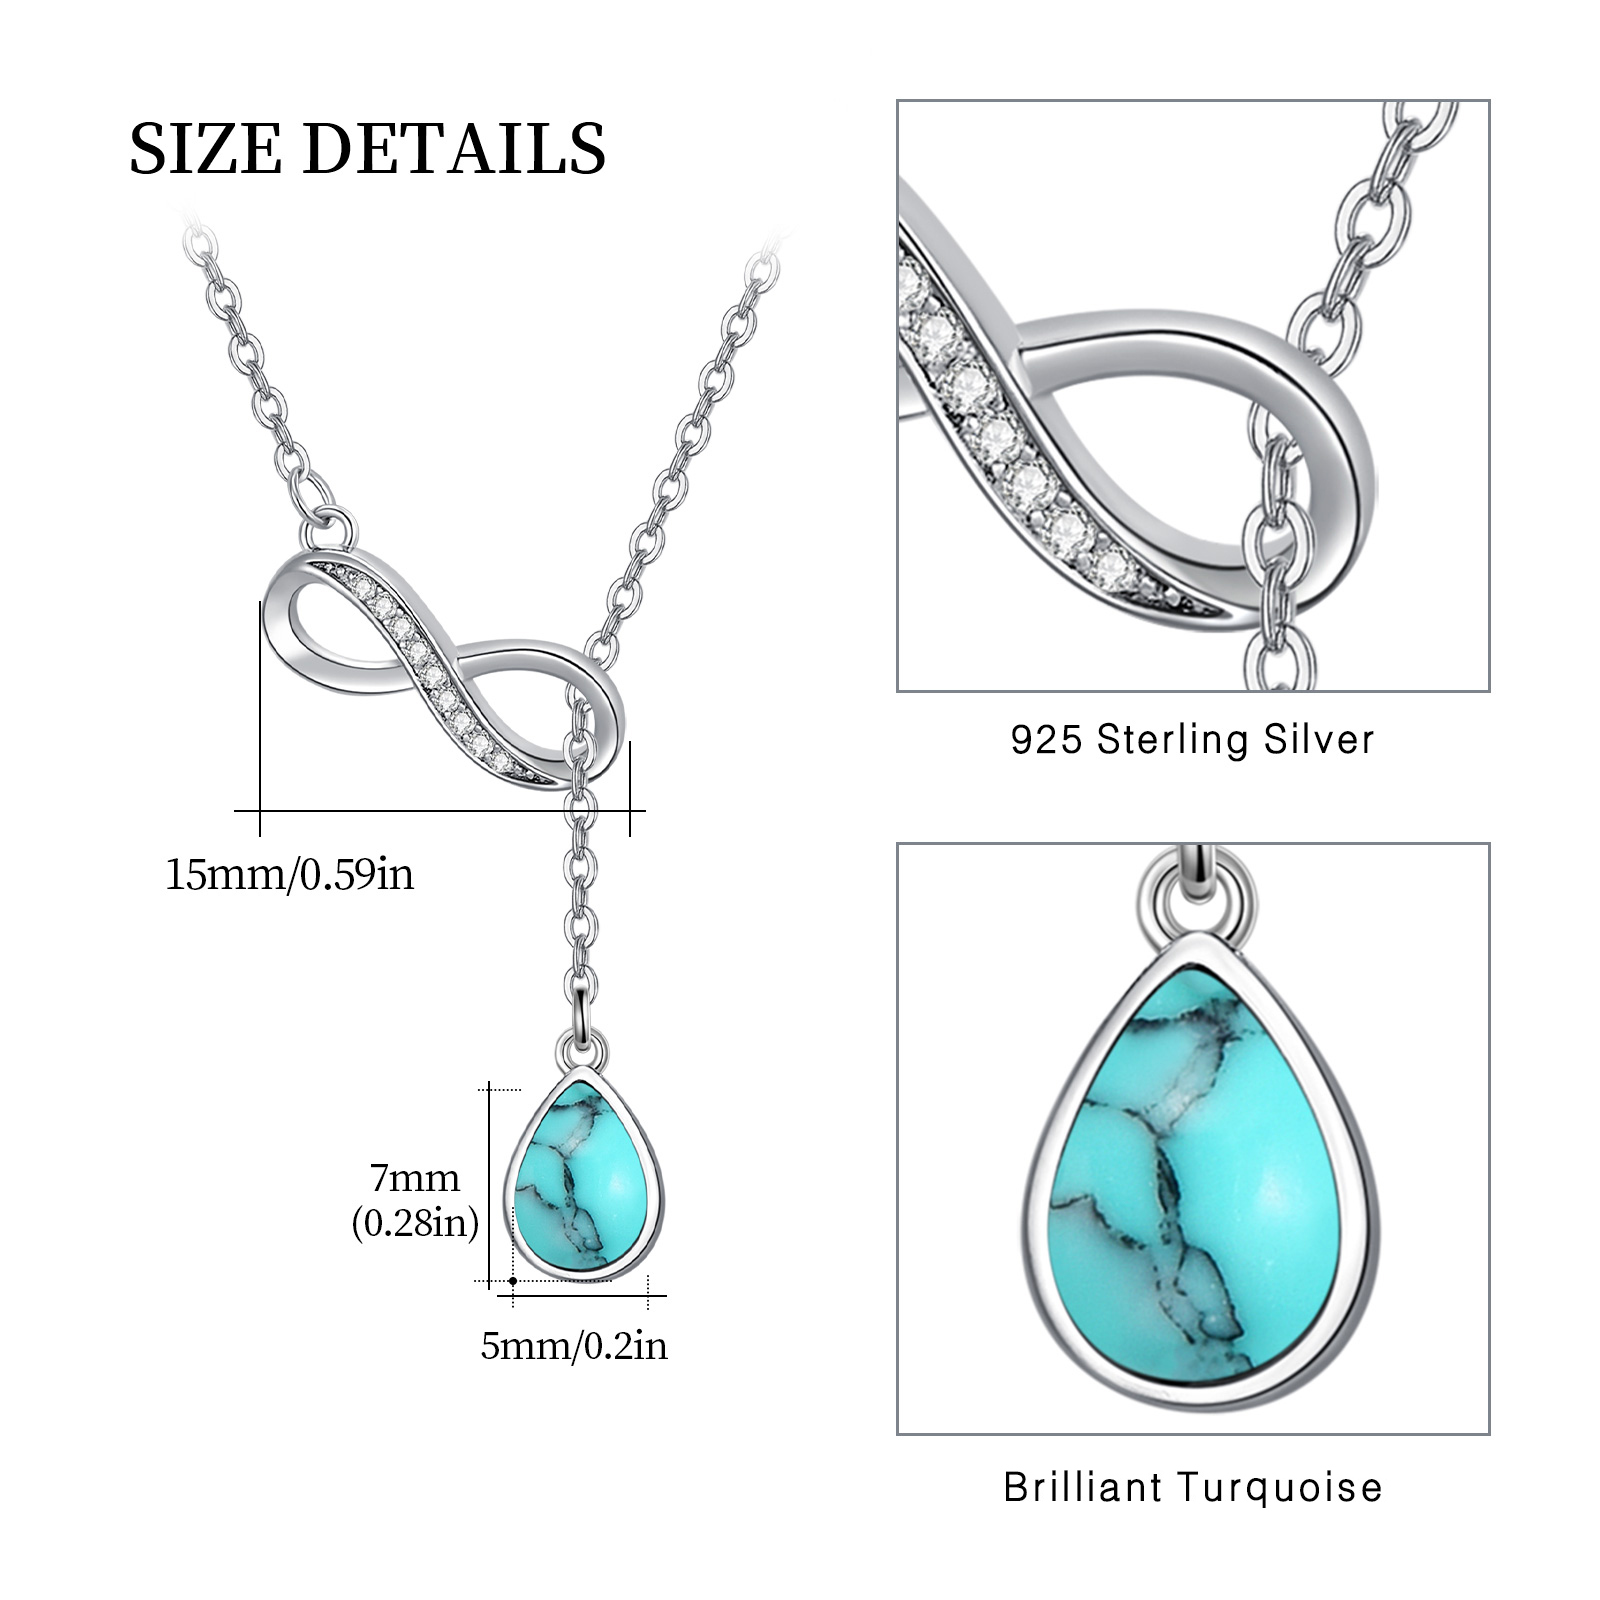 156005c5baf40ff51a327f1c34f2975b2 - 925 Sterling Silver Infinity Turquoise Drop Necklace for Women Girls